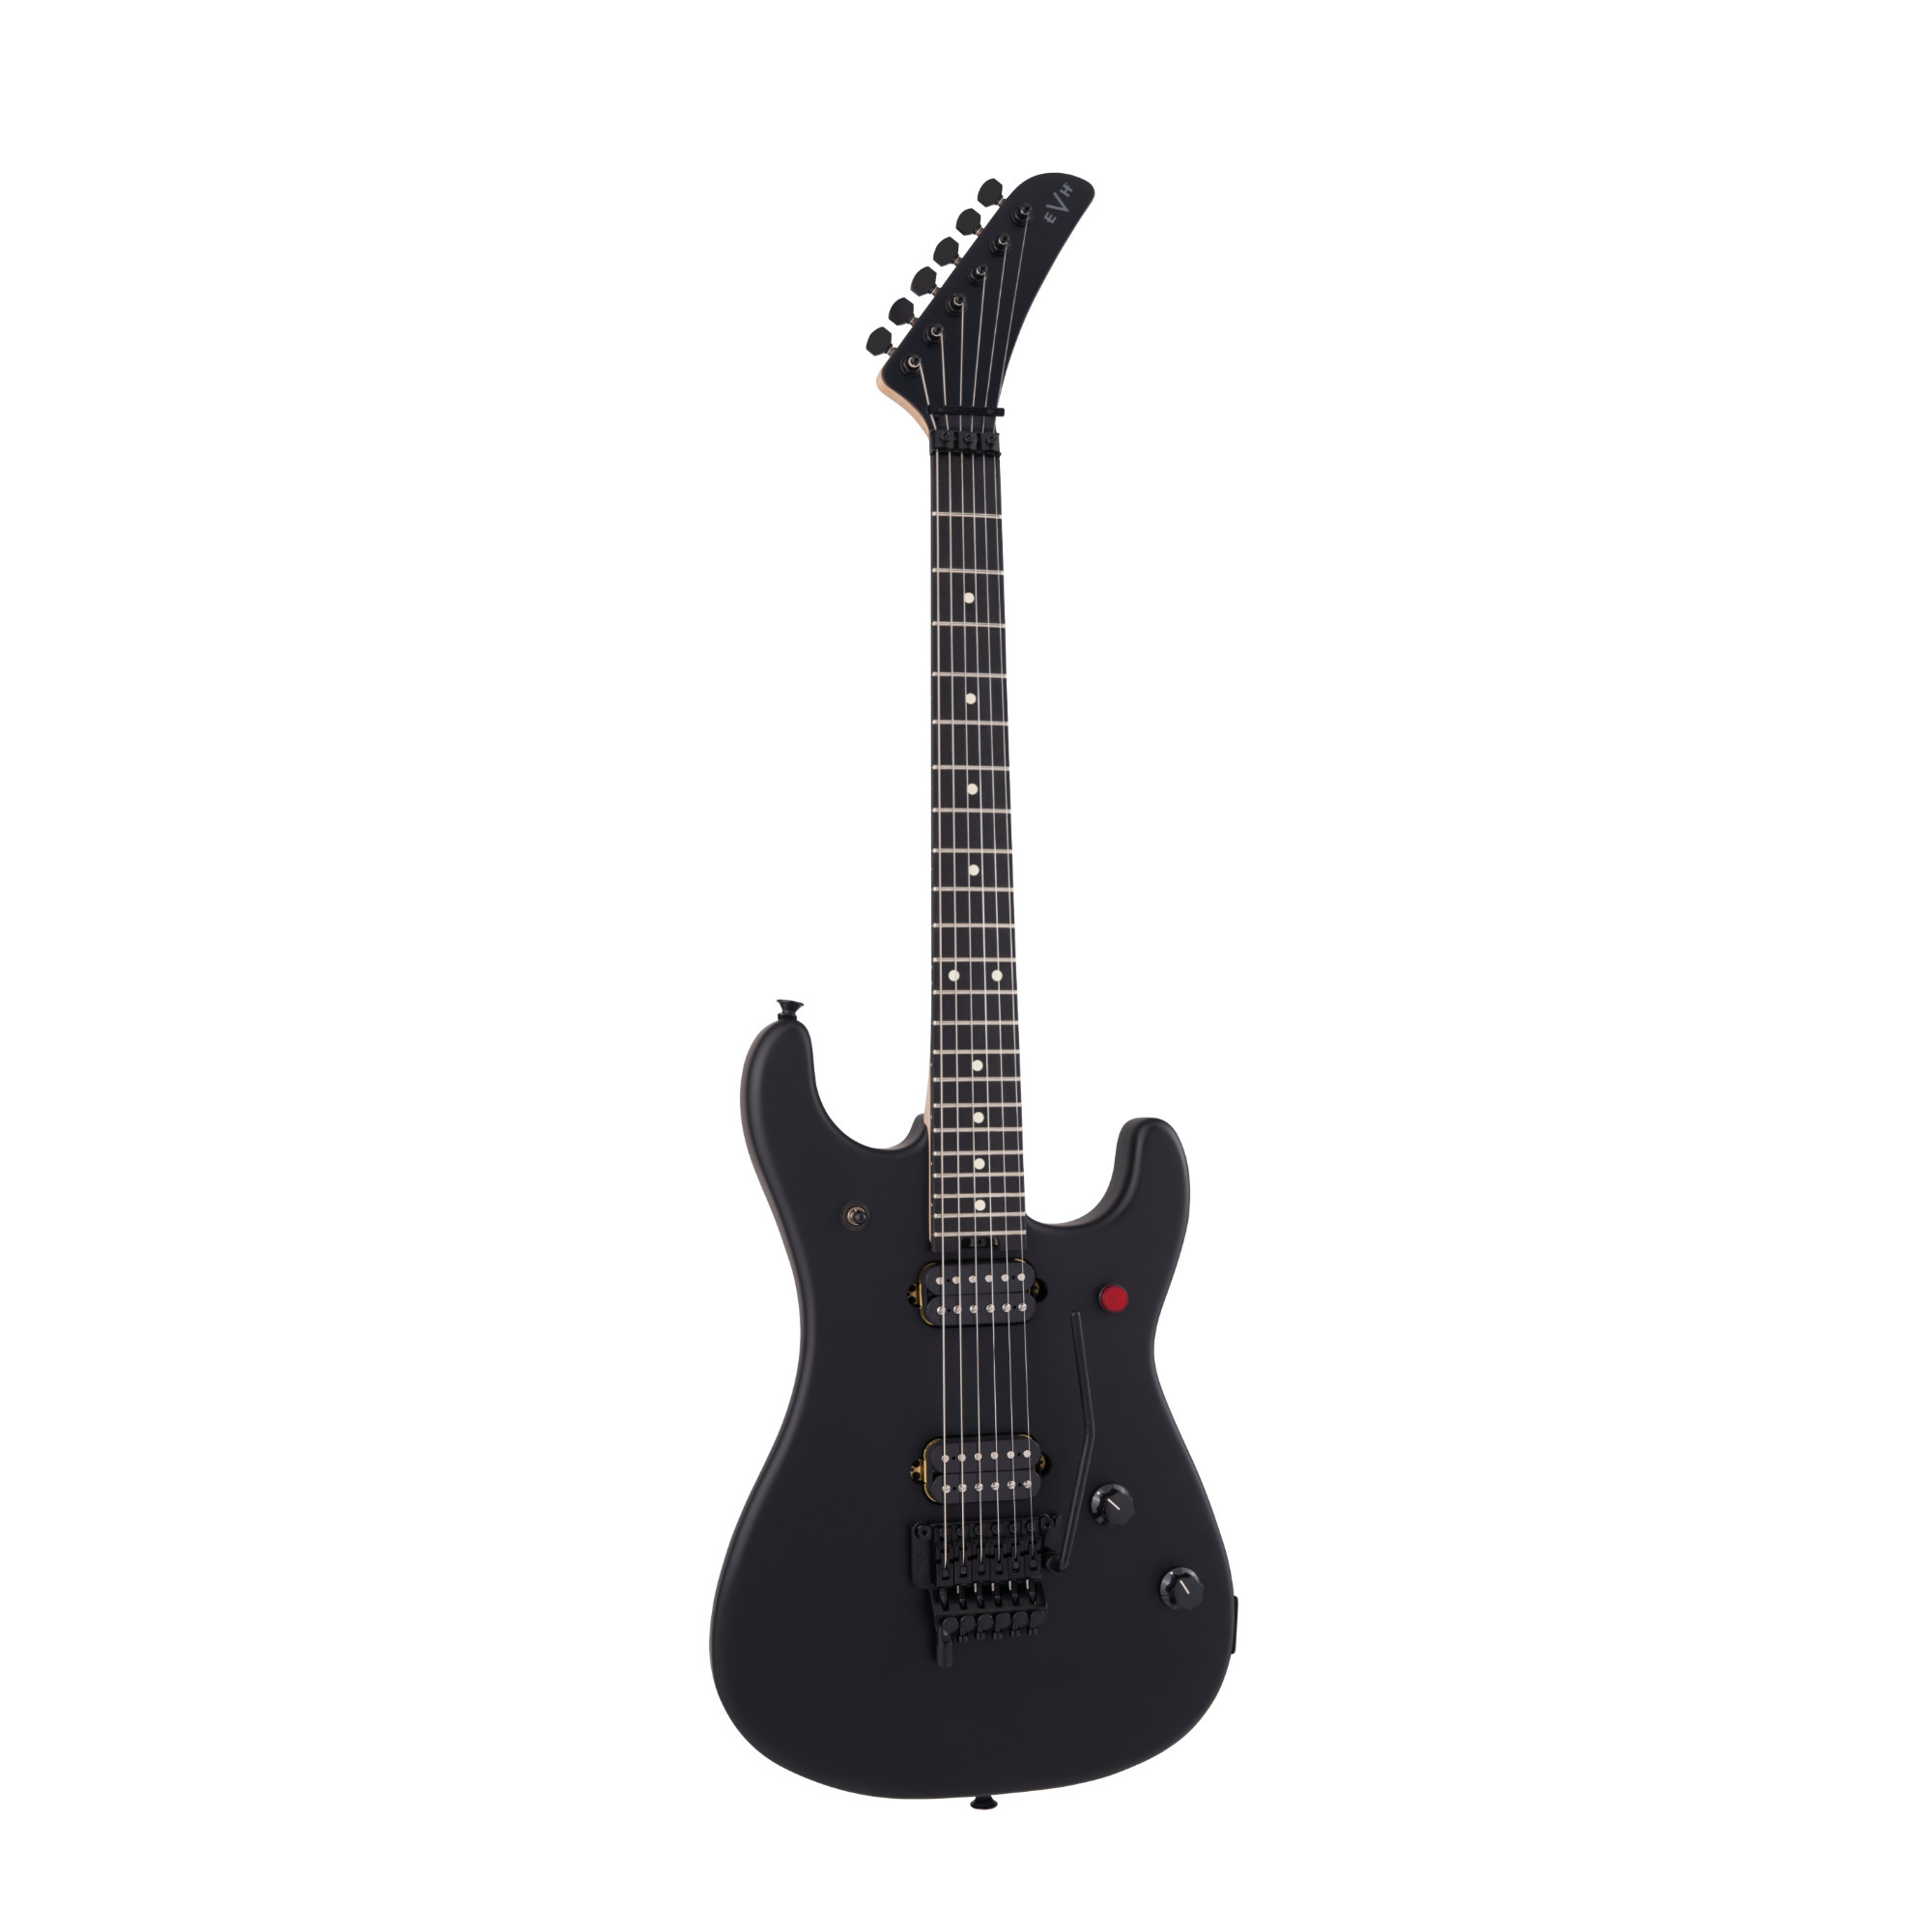 EVH 5150 Series Standard 6-String Electric Guitar with Ebony Fingerboard (Right-Handed, Black) -  5108001568